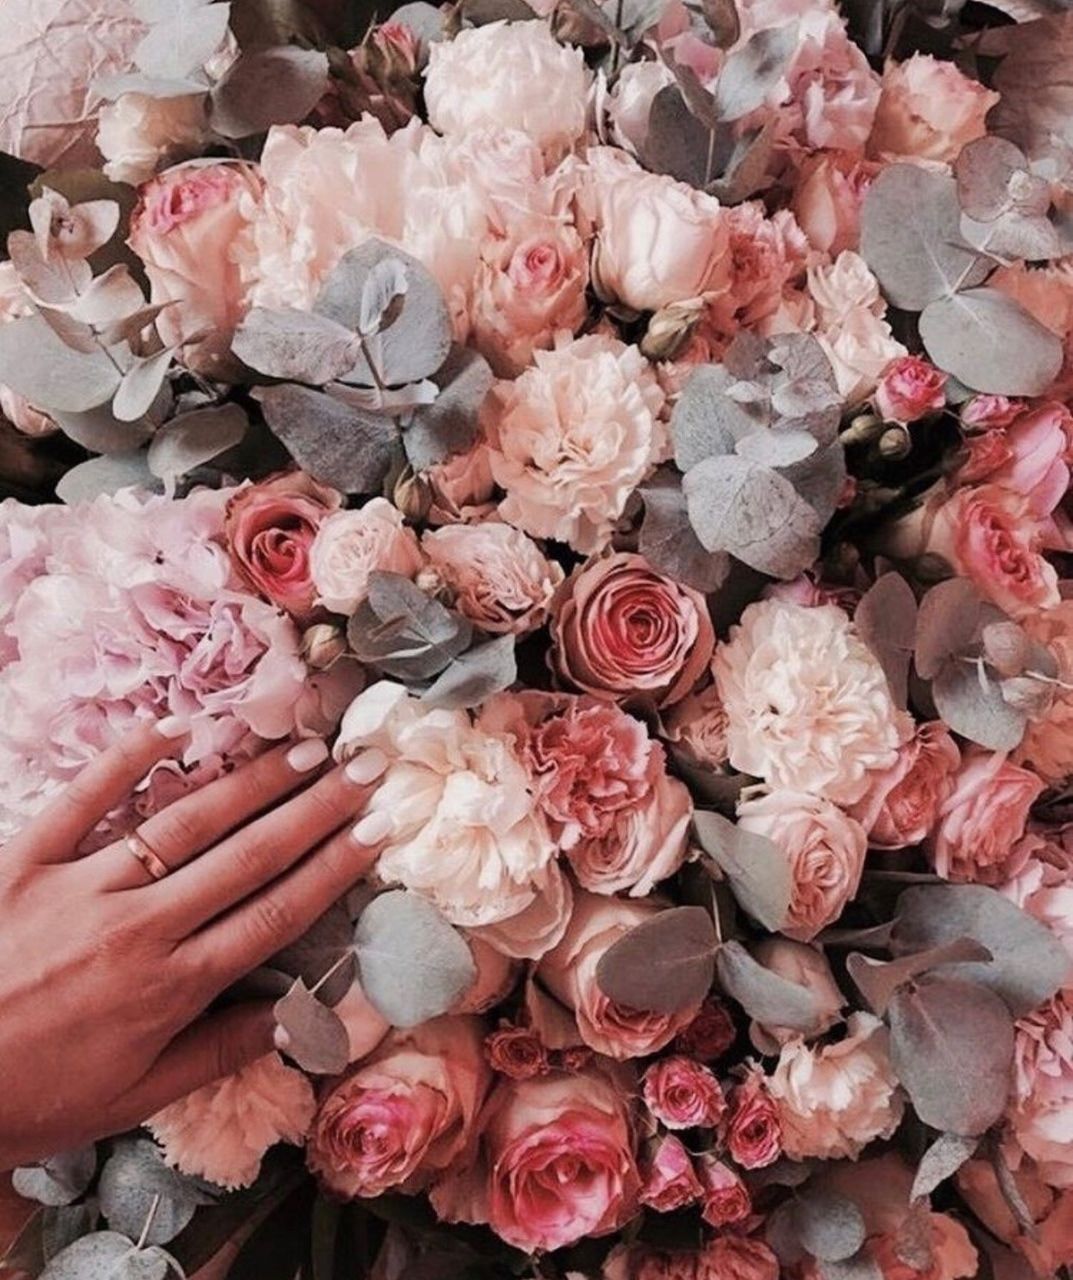 A bouquet of pink flowers with a hand on top of it. - Roses